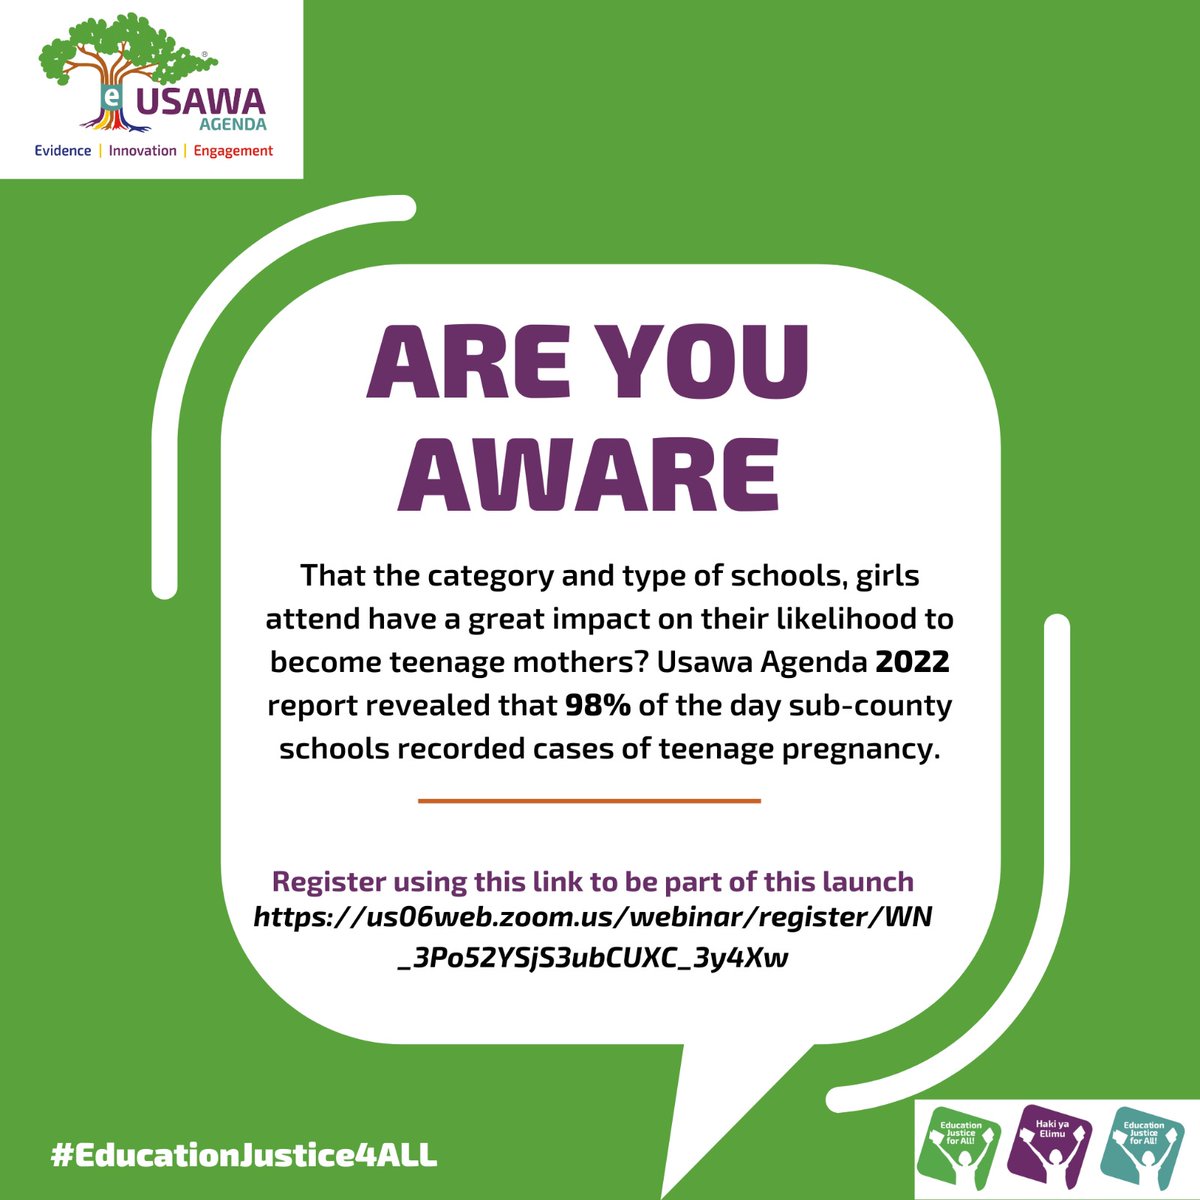 Usawa Agenda's report launch on April 24th is a critical moment to address the inequities in Kenya's secondary education system. Let's prioritize #EducationJustice4ALL.